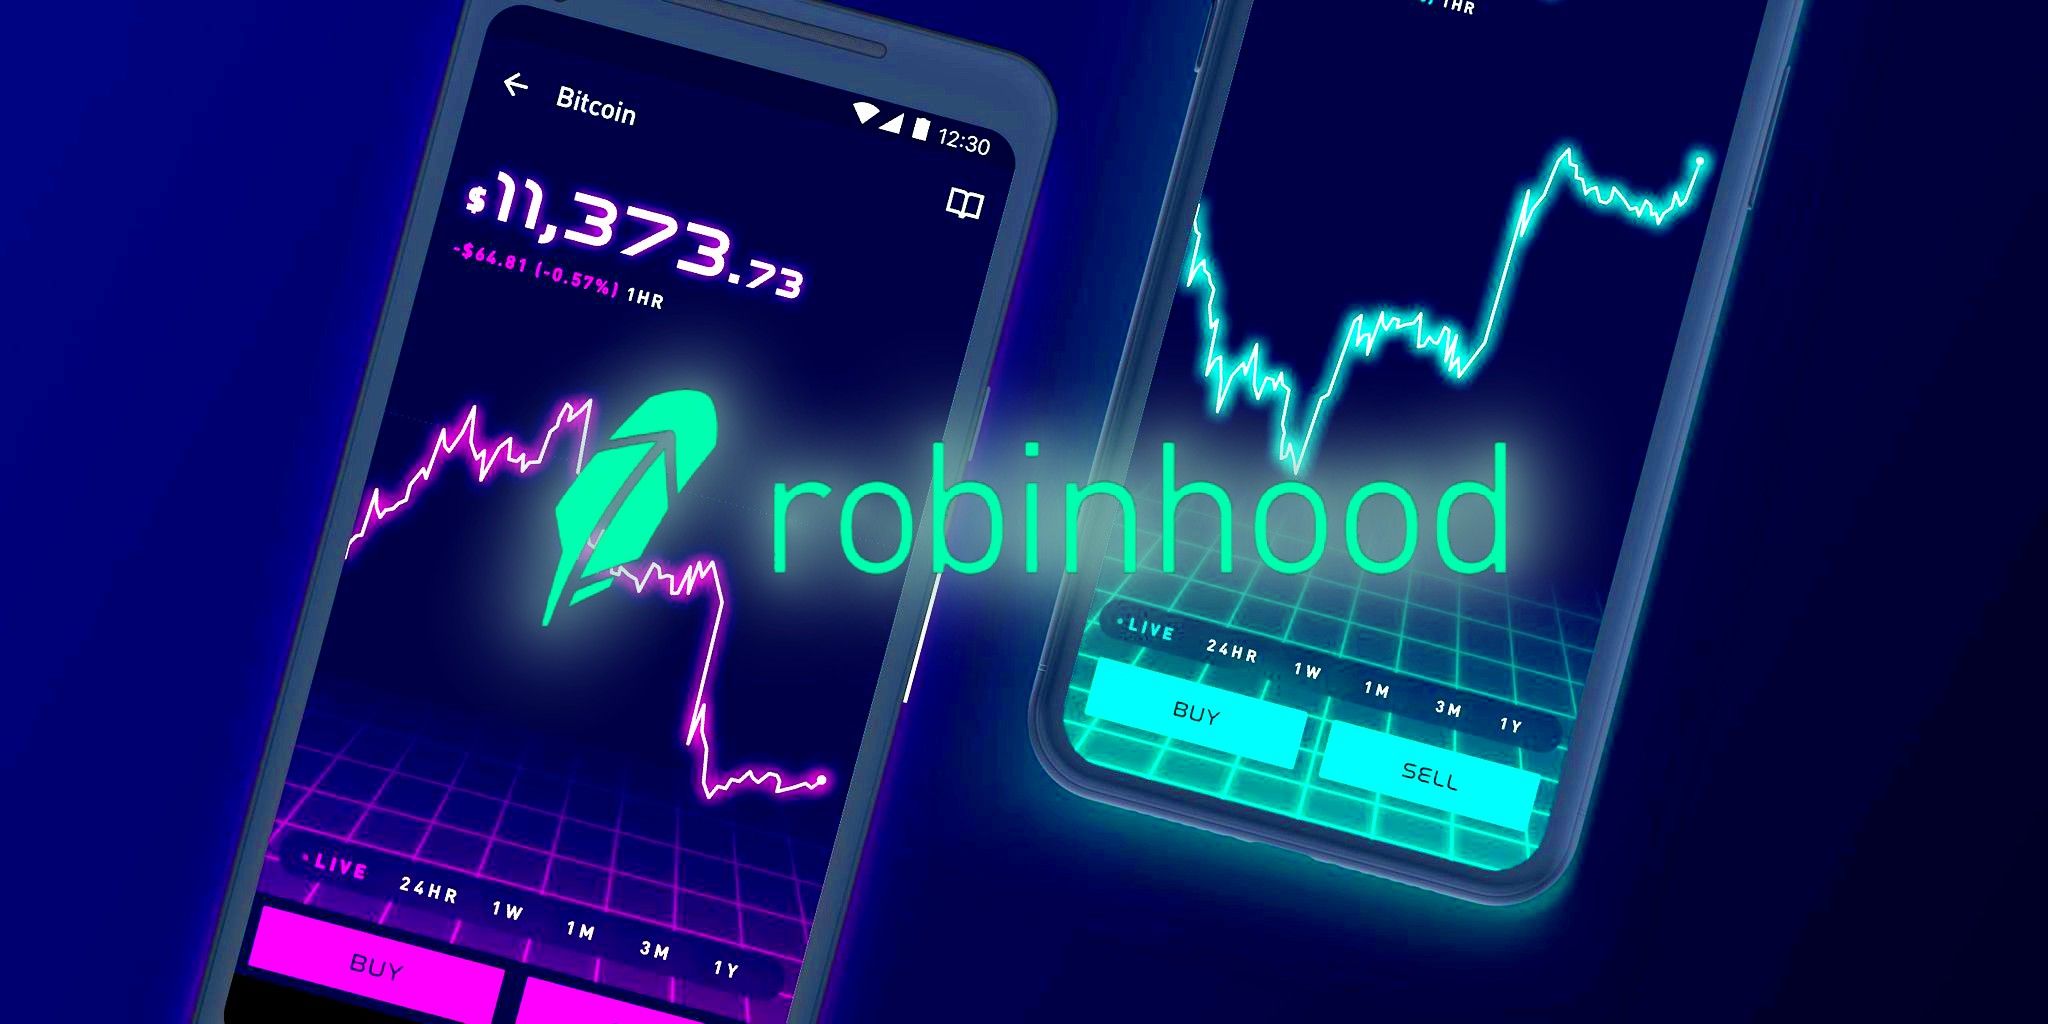 Robinhood logo over two smartphones with trading charts